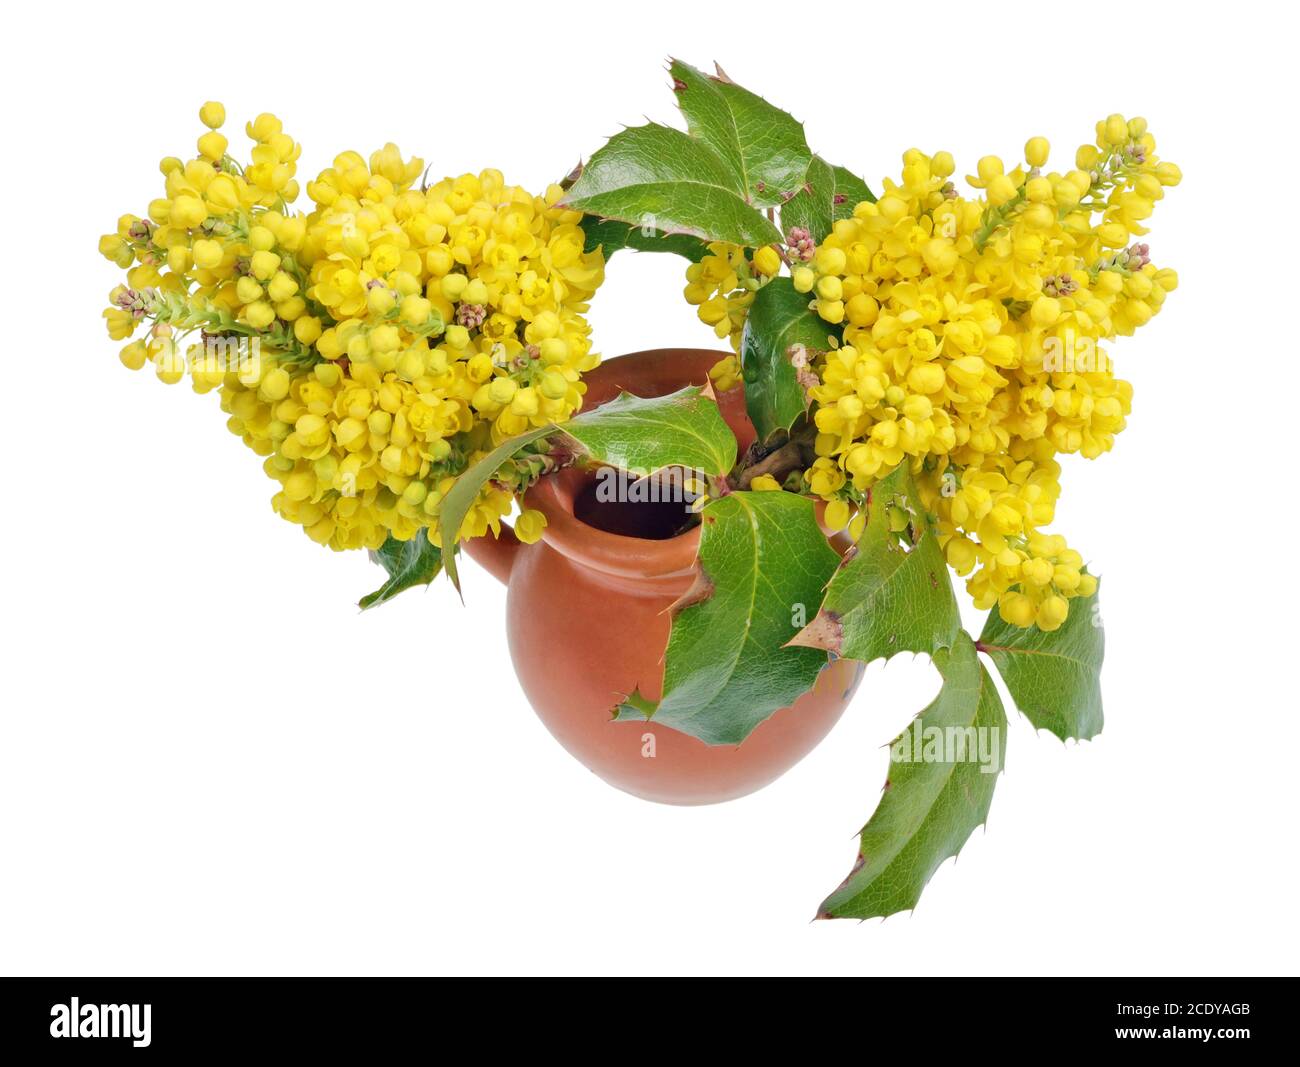 Yellow spring flowers of an evergreen holly plant in a ceramic jug isolated Stock Photo